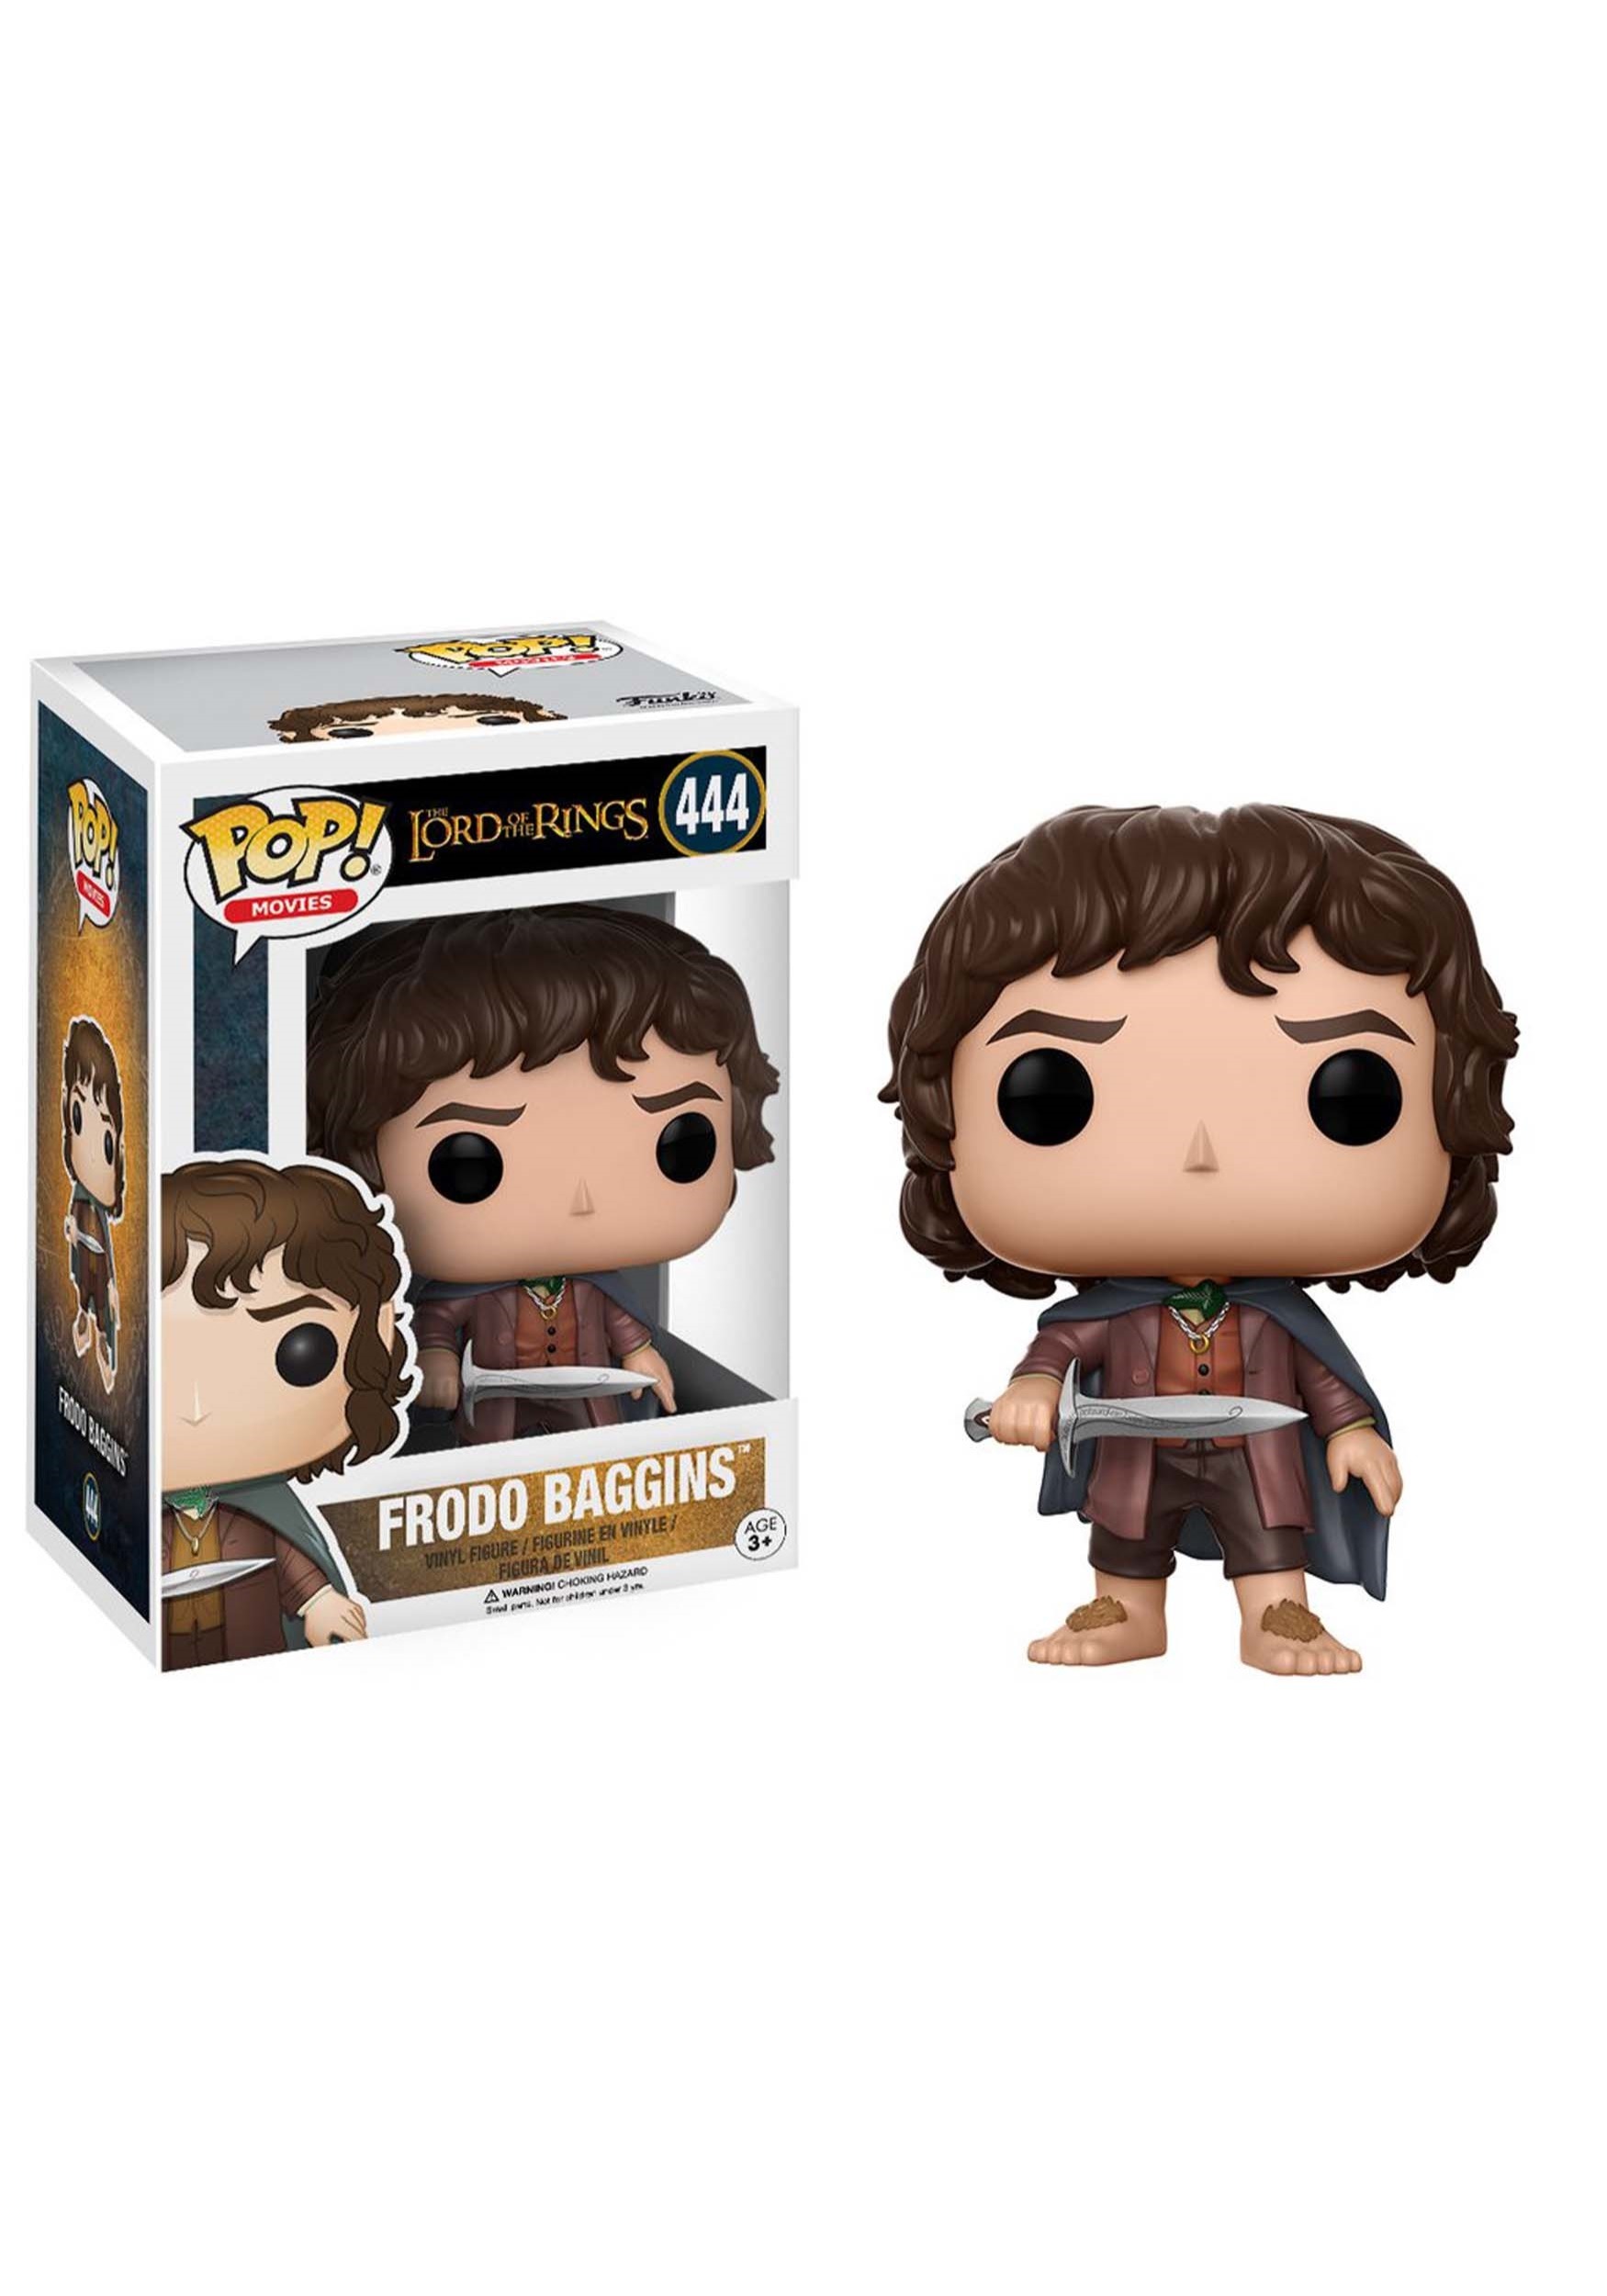 styles may vary Movies: Lord Of The Rings/Hobbit Frodo Baggins Funko 13551 Accessory Toys & Games Miscellaneous POP